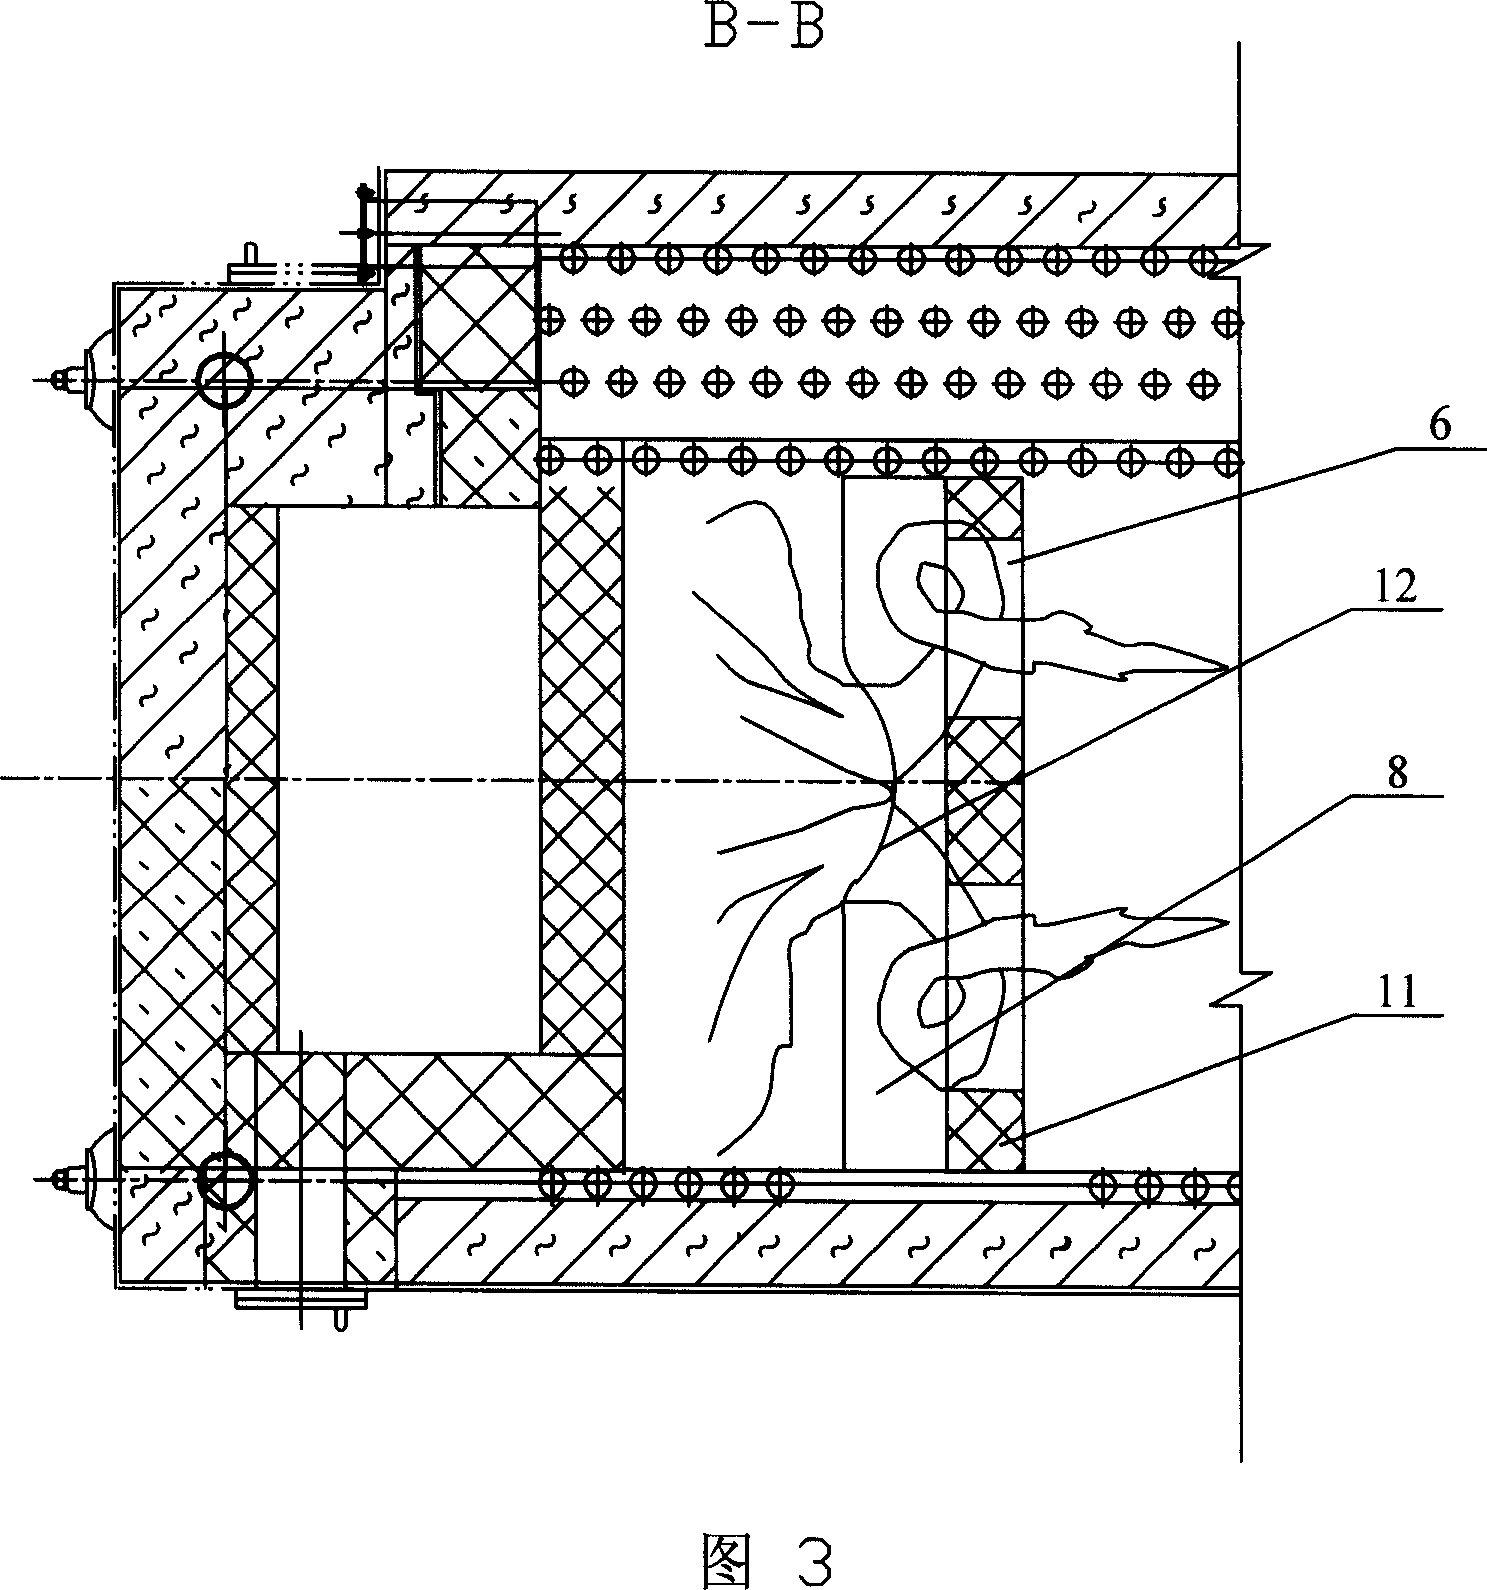 Small-sized industrial boiler hearth